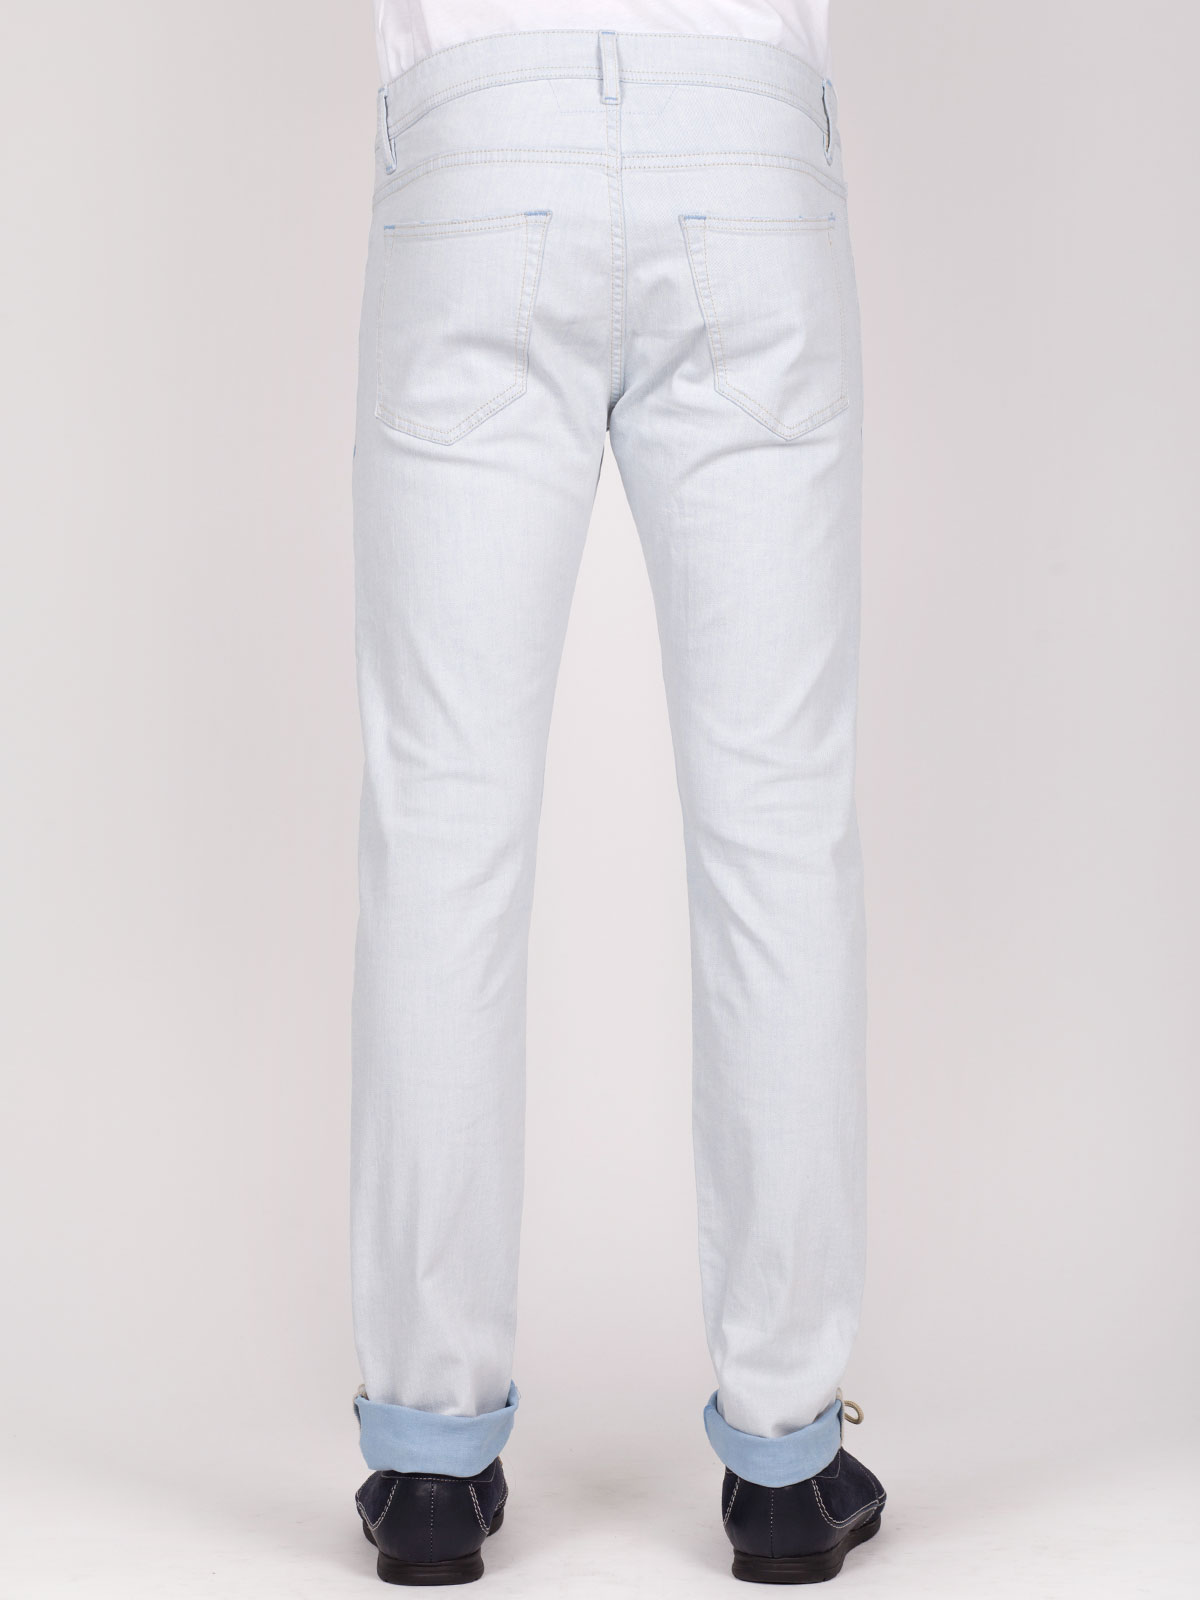 White jeans with blue effect - 62138 € 44.43 img3